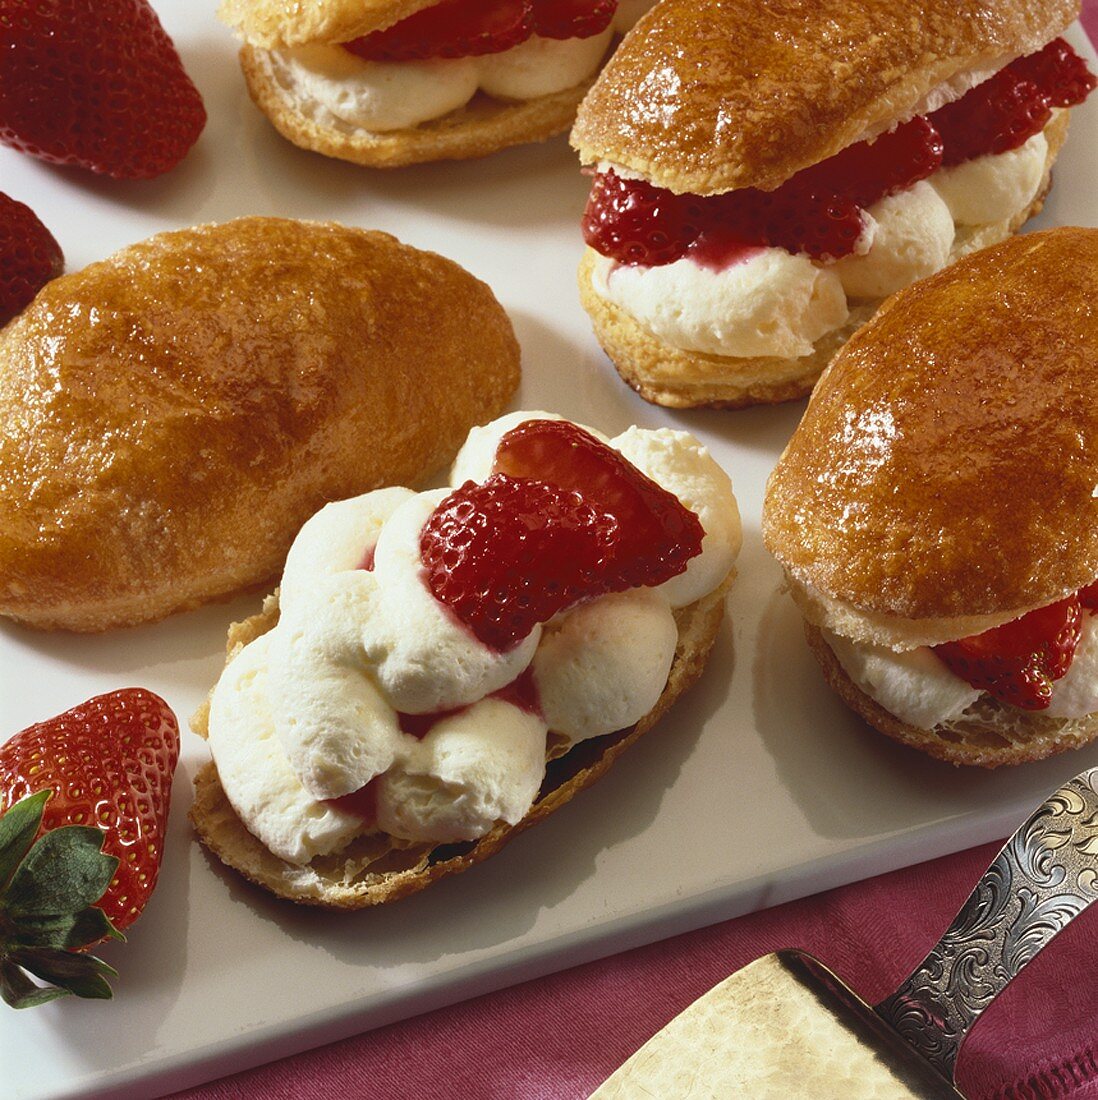 Filled 'Shoe soles' (Puff pastry slices with strawberries & cream)